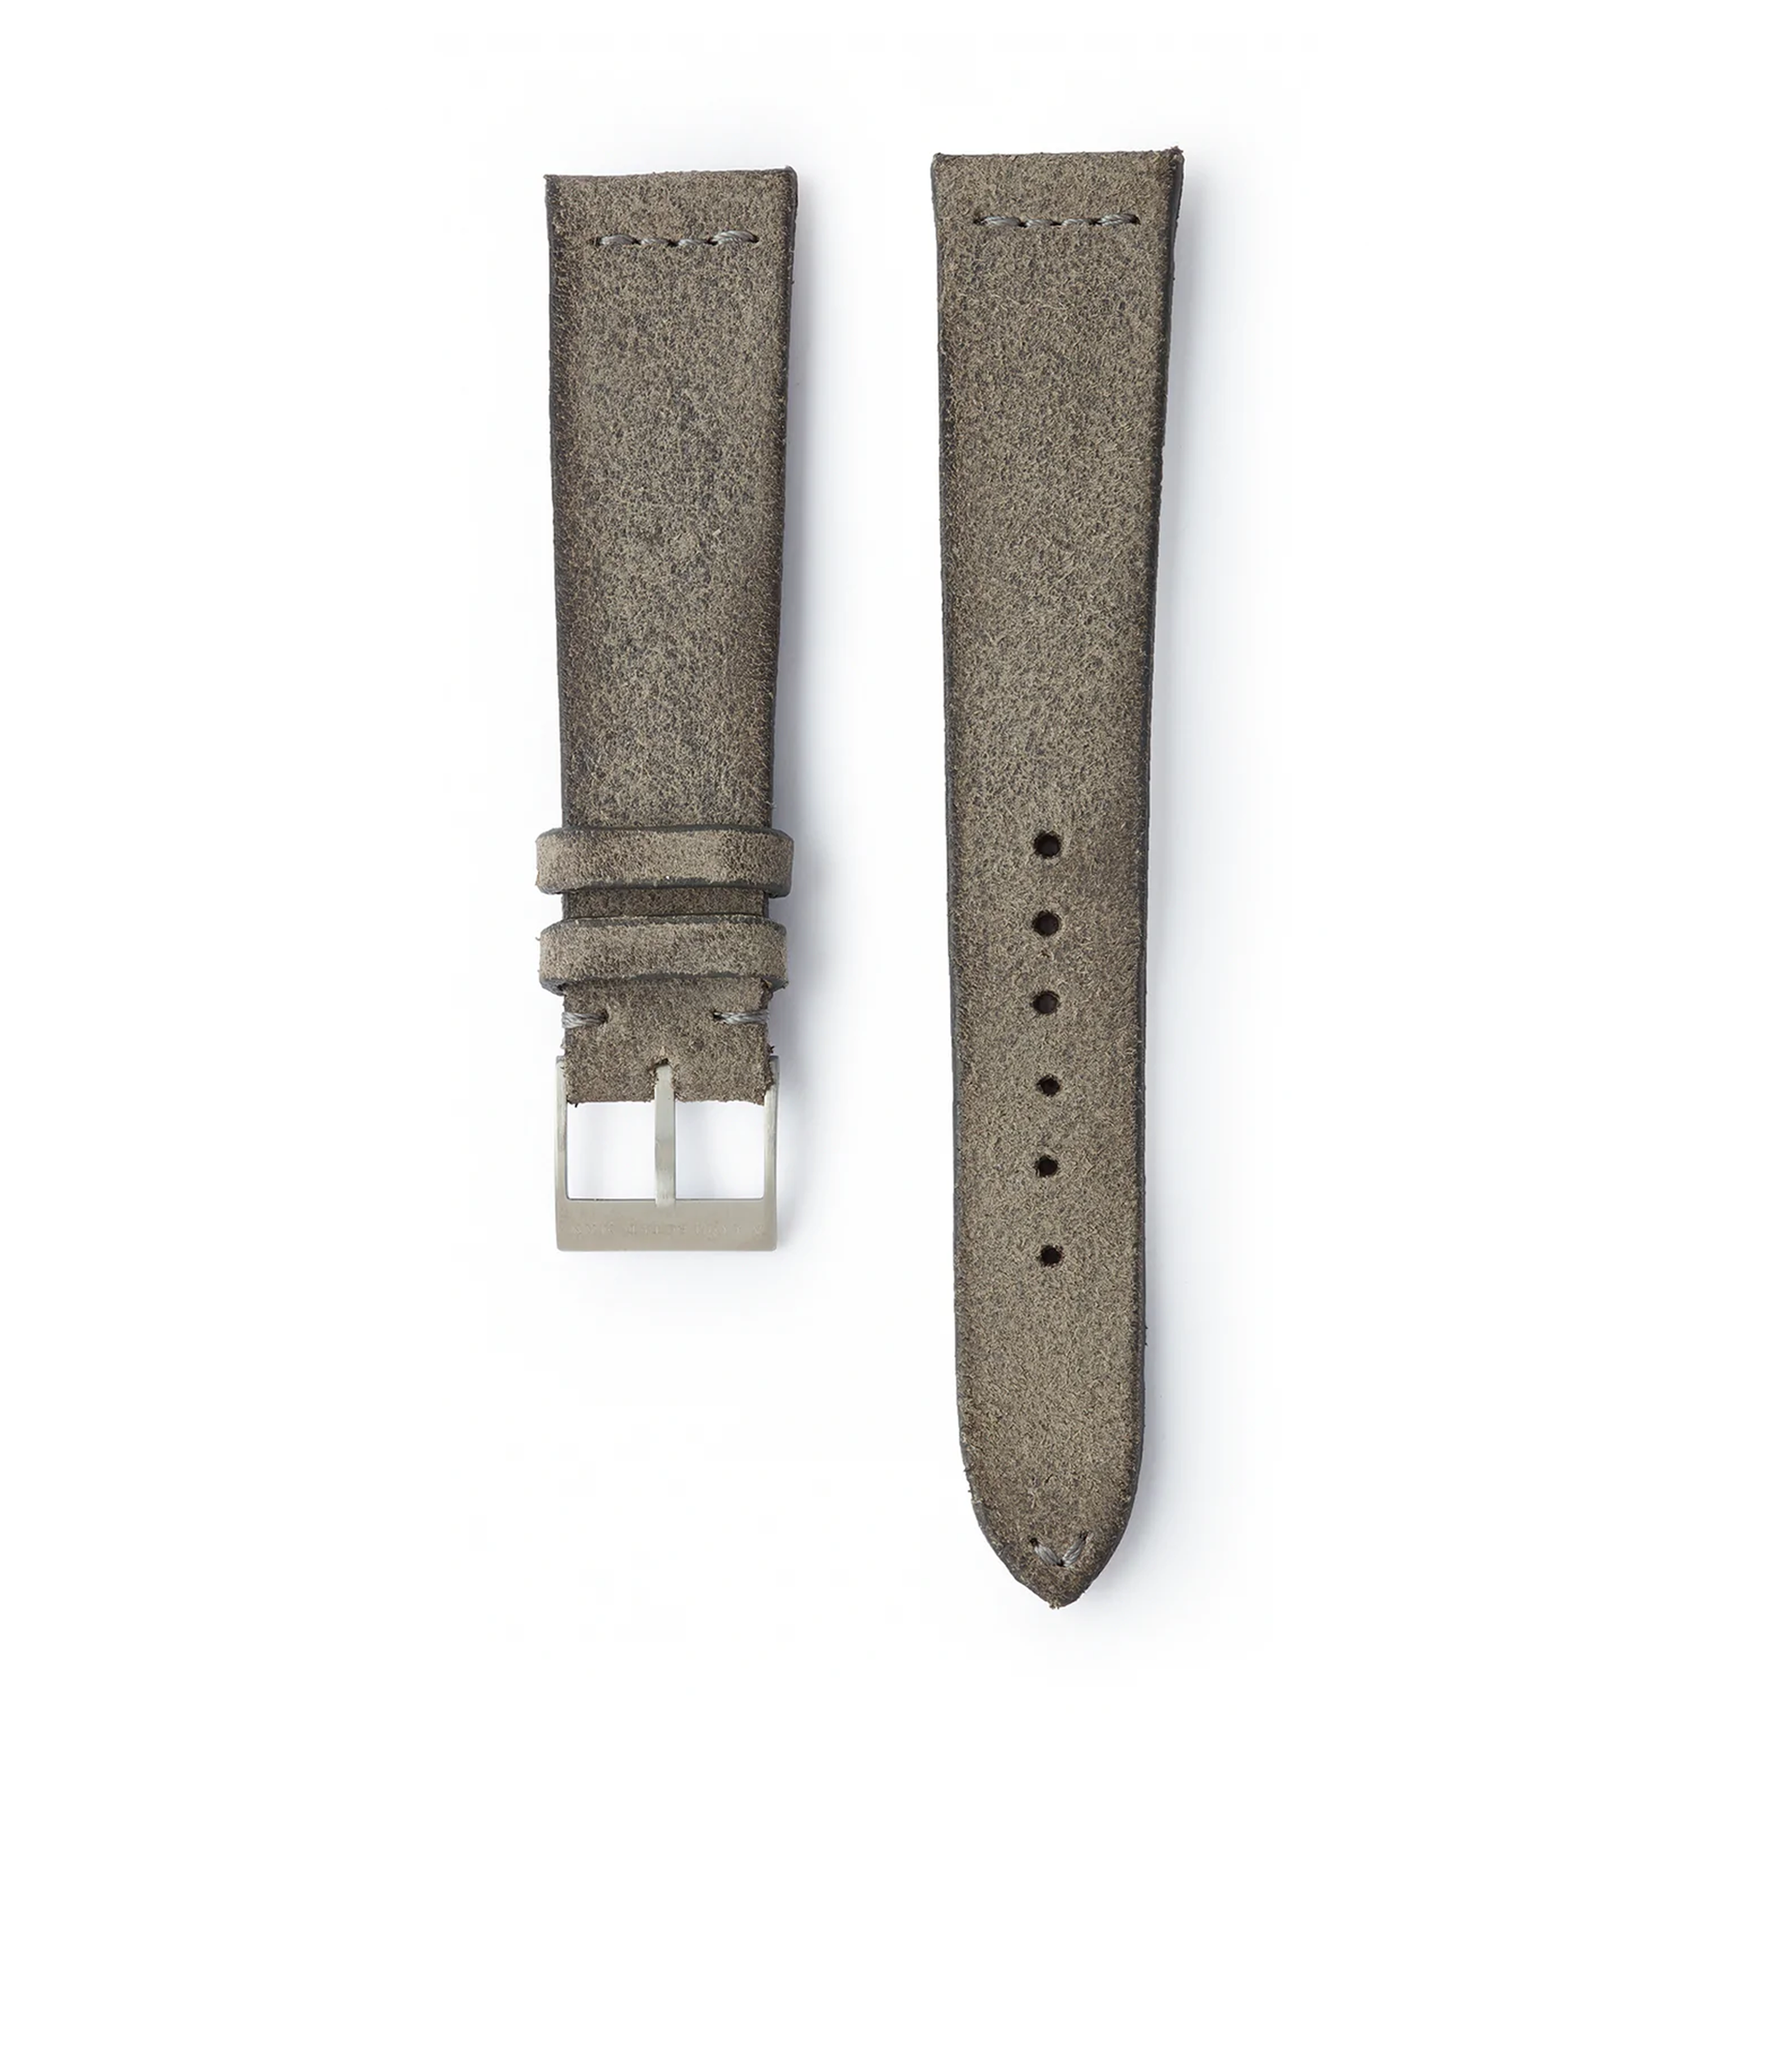 Selling 18mm Hamburg Molequin watch strap rugged grey suede leather quick-release springbars buckle handcrafted European-made for sale online at A Collected Man London